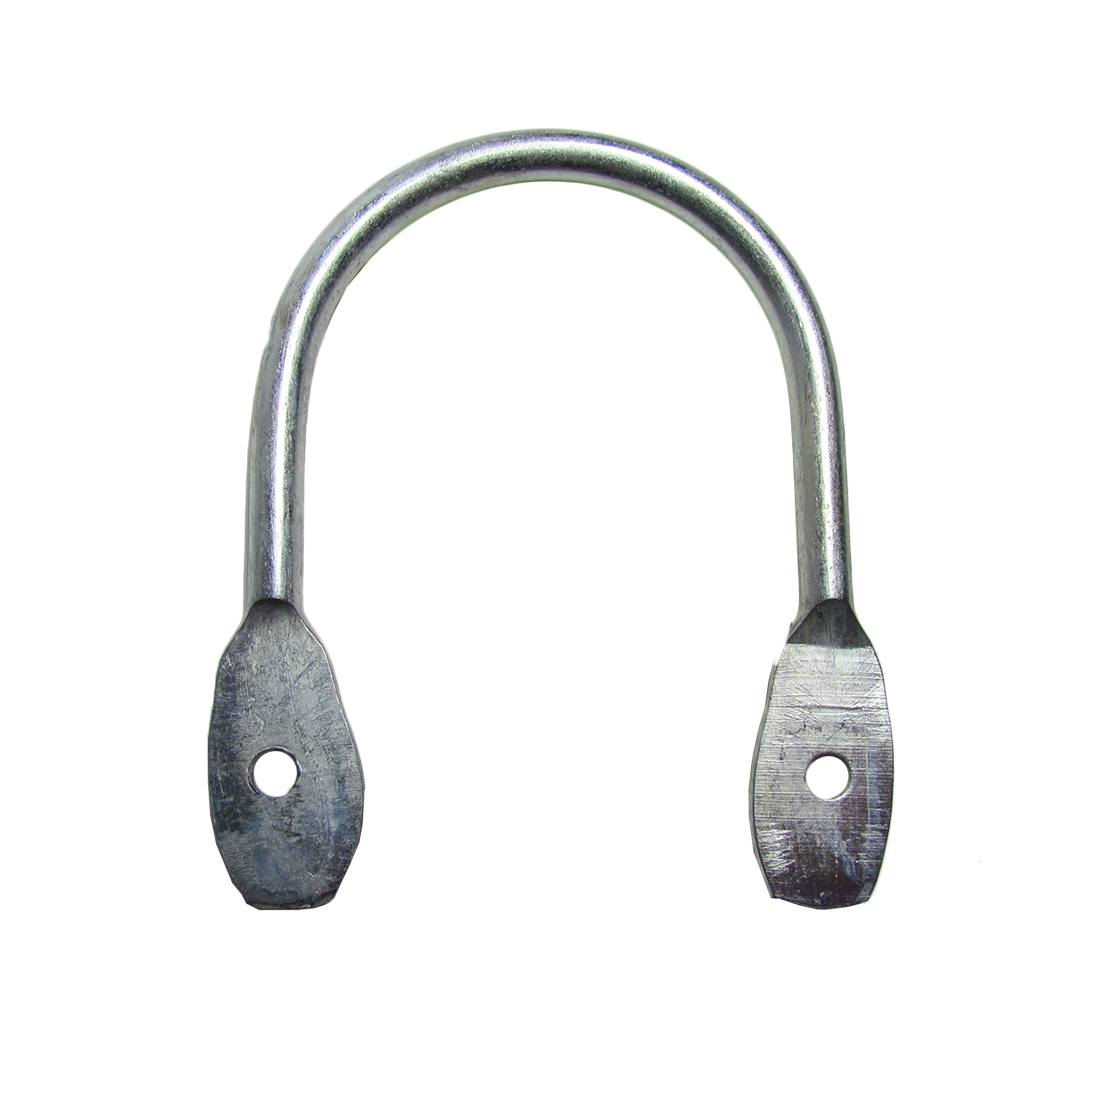 Sky Genie Replacement Ring for Bosun's Chairs - Main Product View